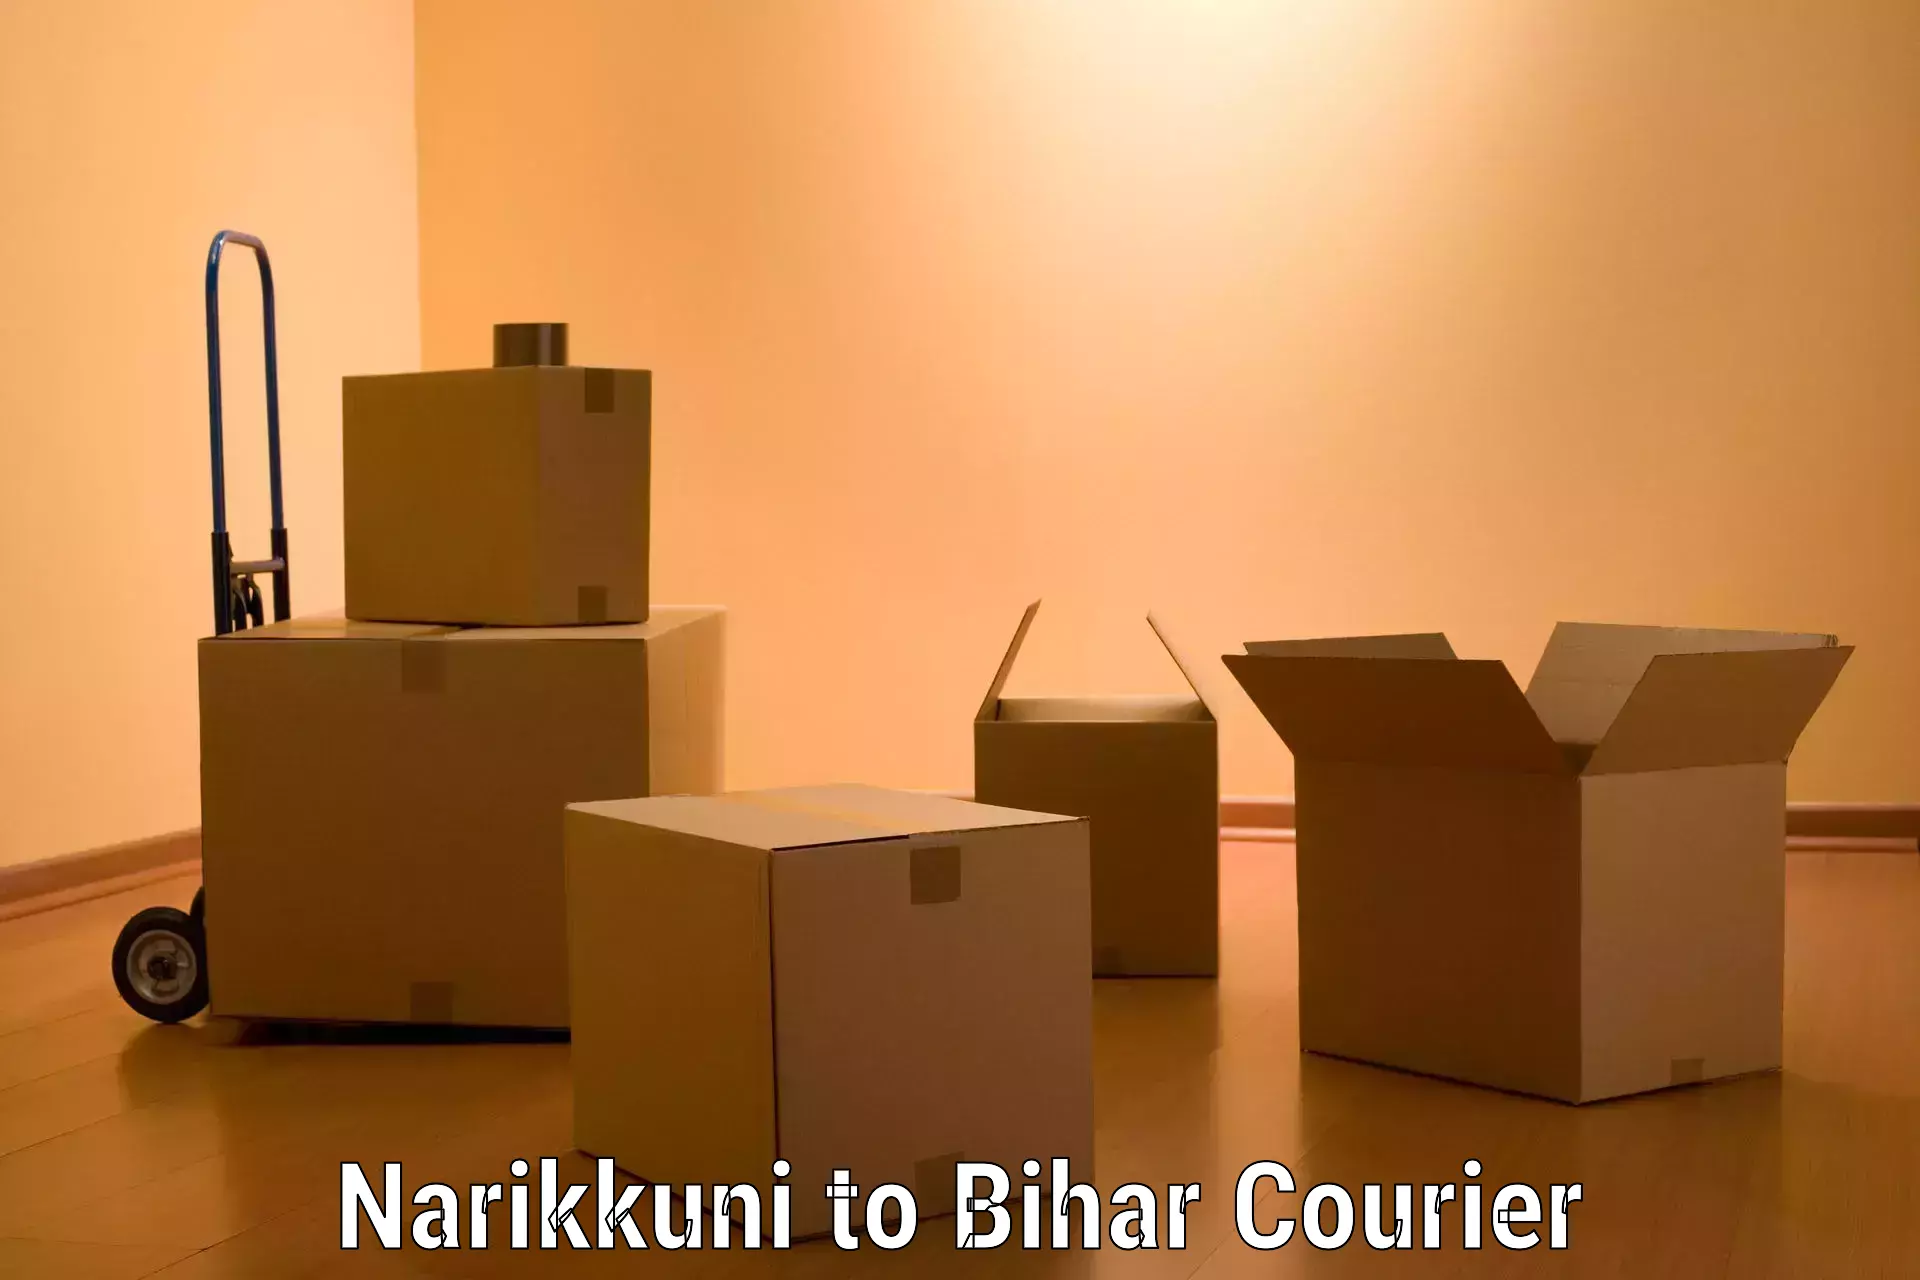 Moving and packing experts Narikkuni to Singhia